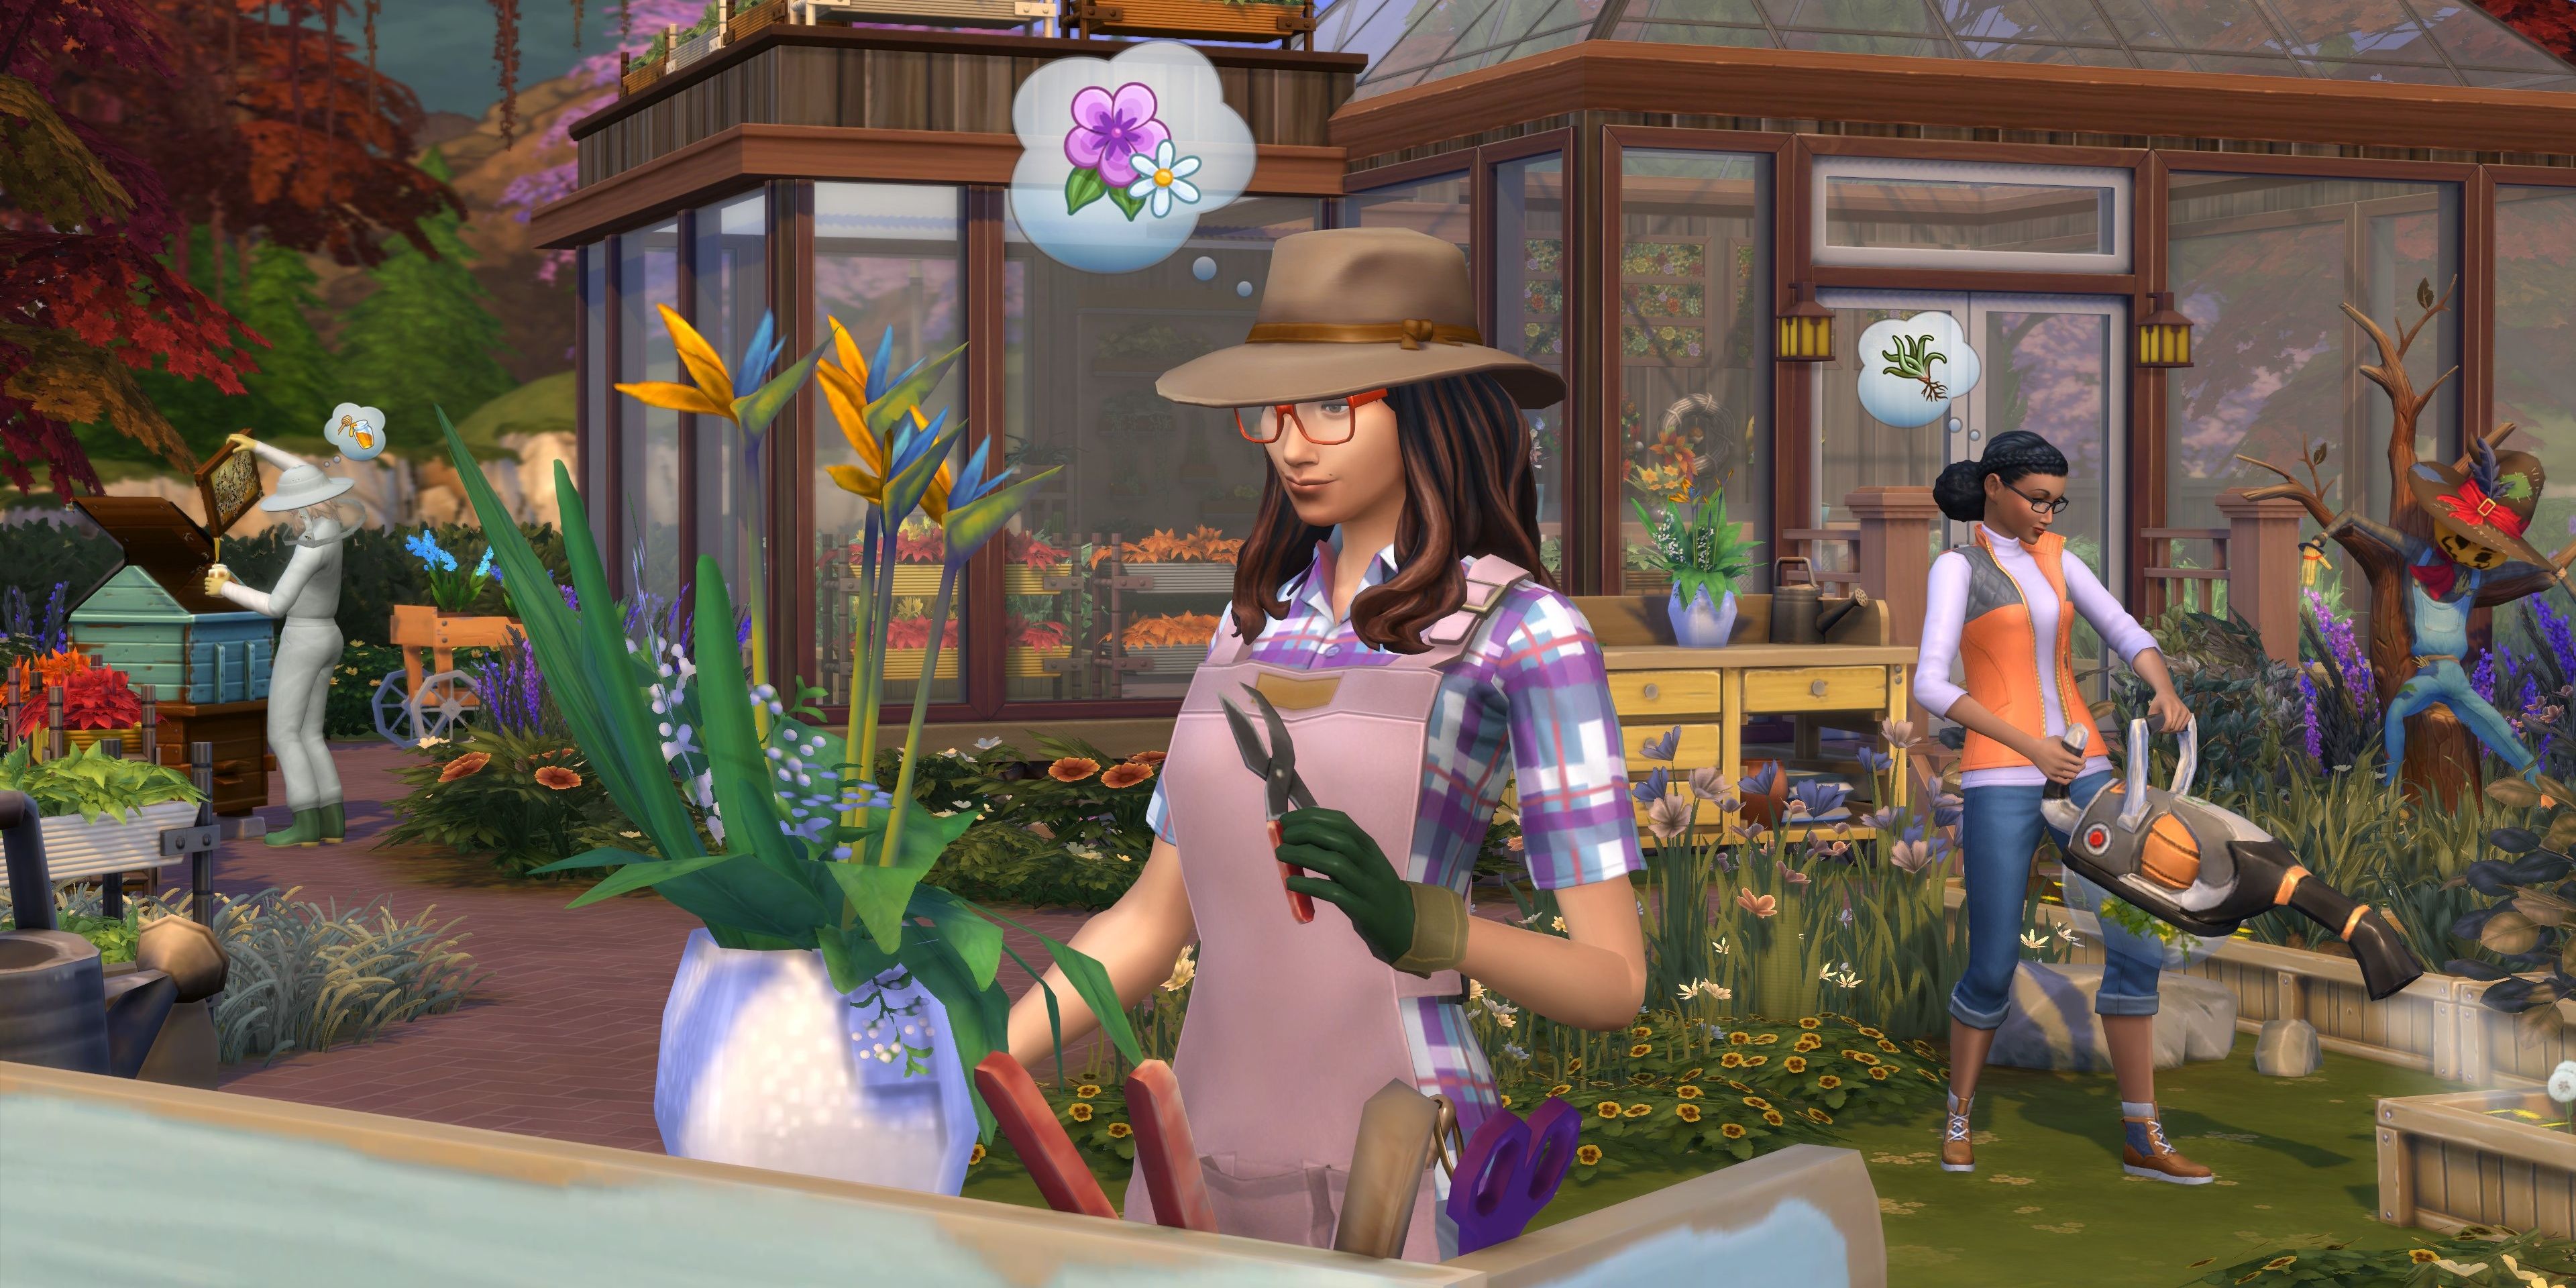 Three Sims performing outdoor Earth Day holiday activities in a garden.